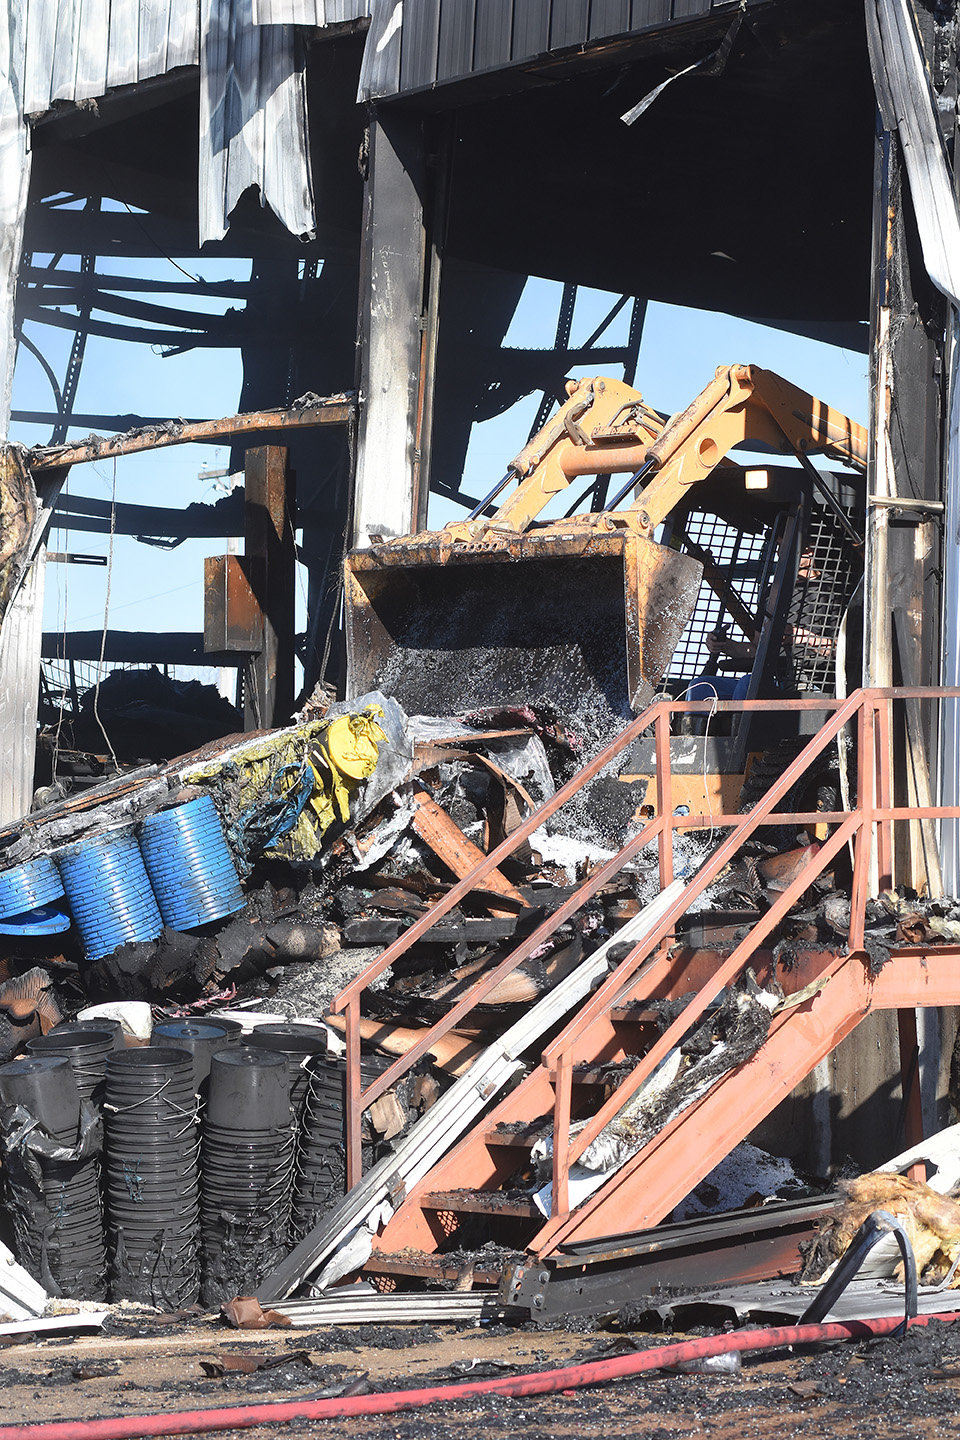 Plastic buckets and lids were among items manufactured at the plant which were being removed from the still smoldering fire late Tuesday morning.